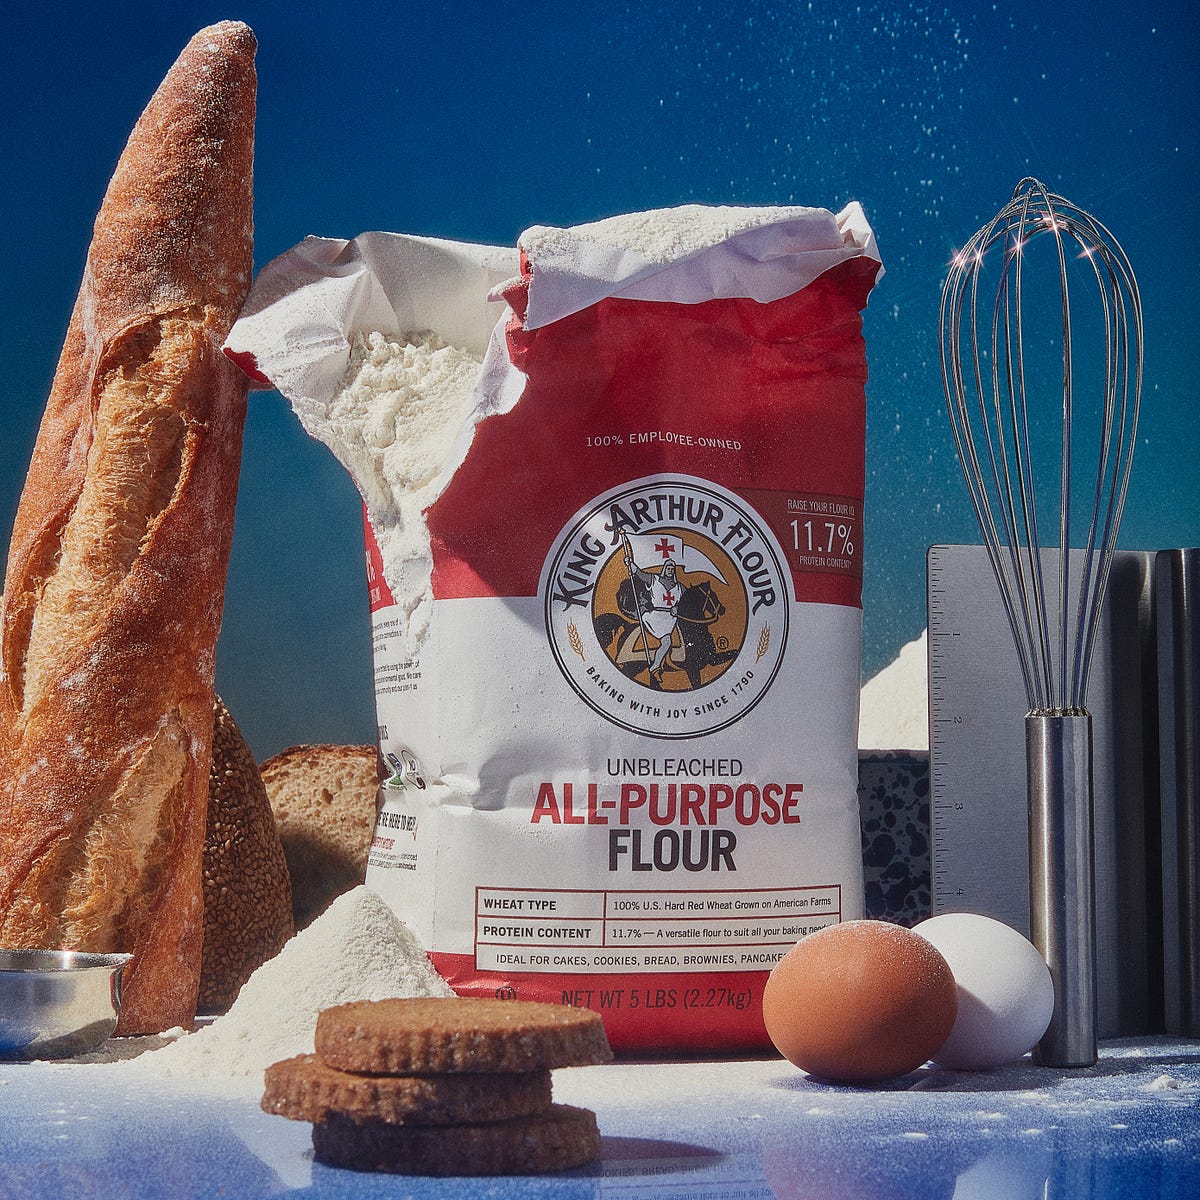 Buy KING ARTHUR BAKING COMPANY Products at Whole Foods Market